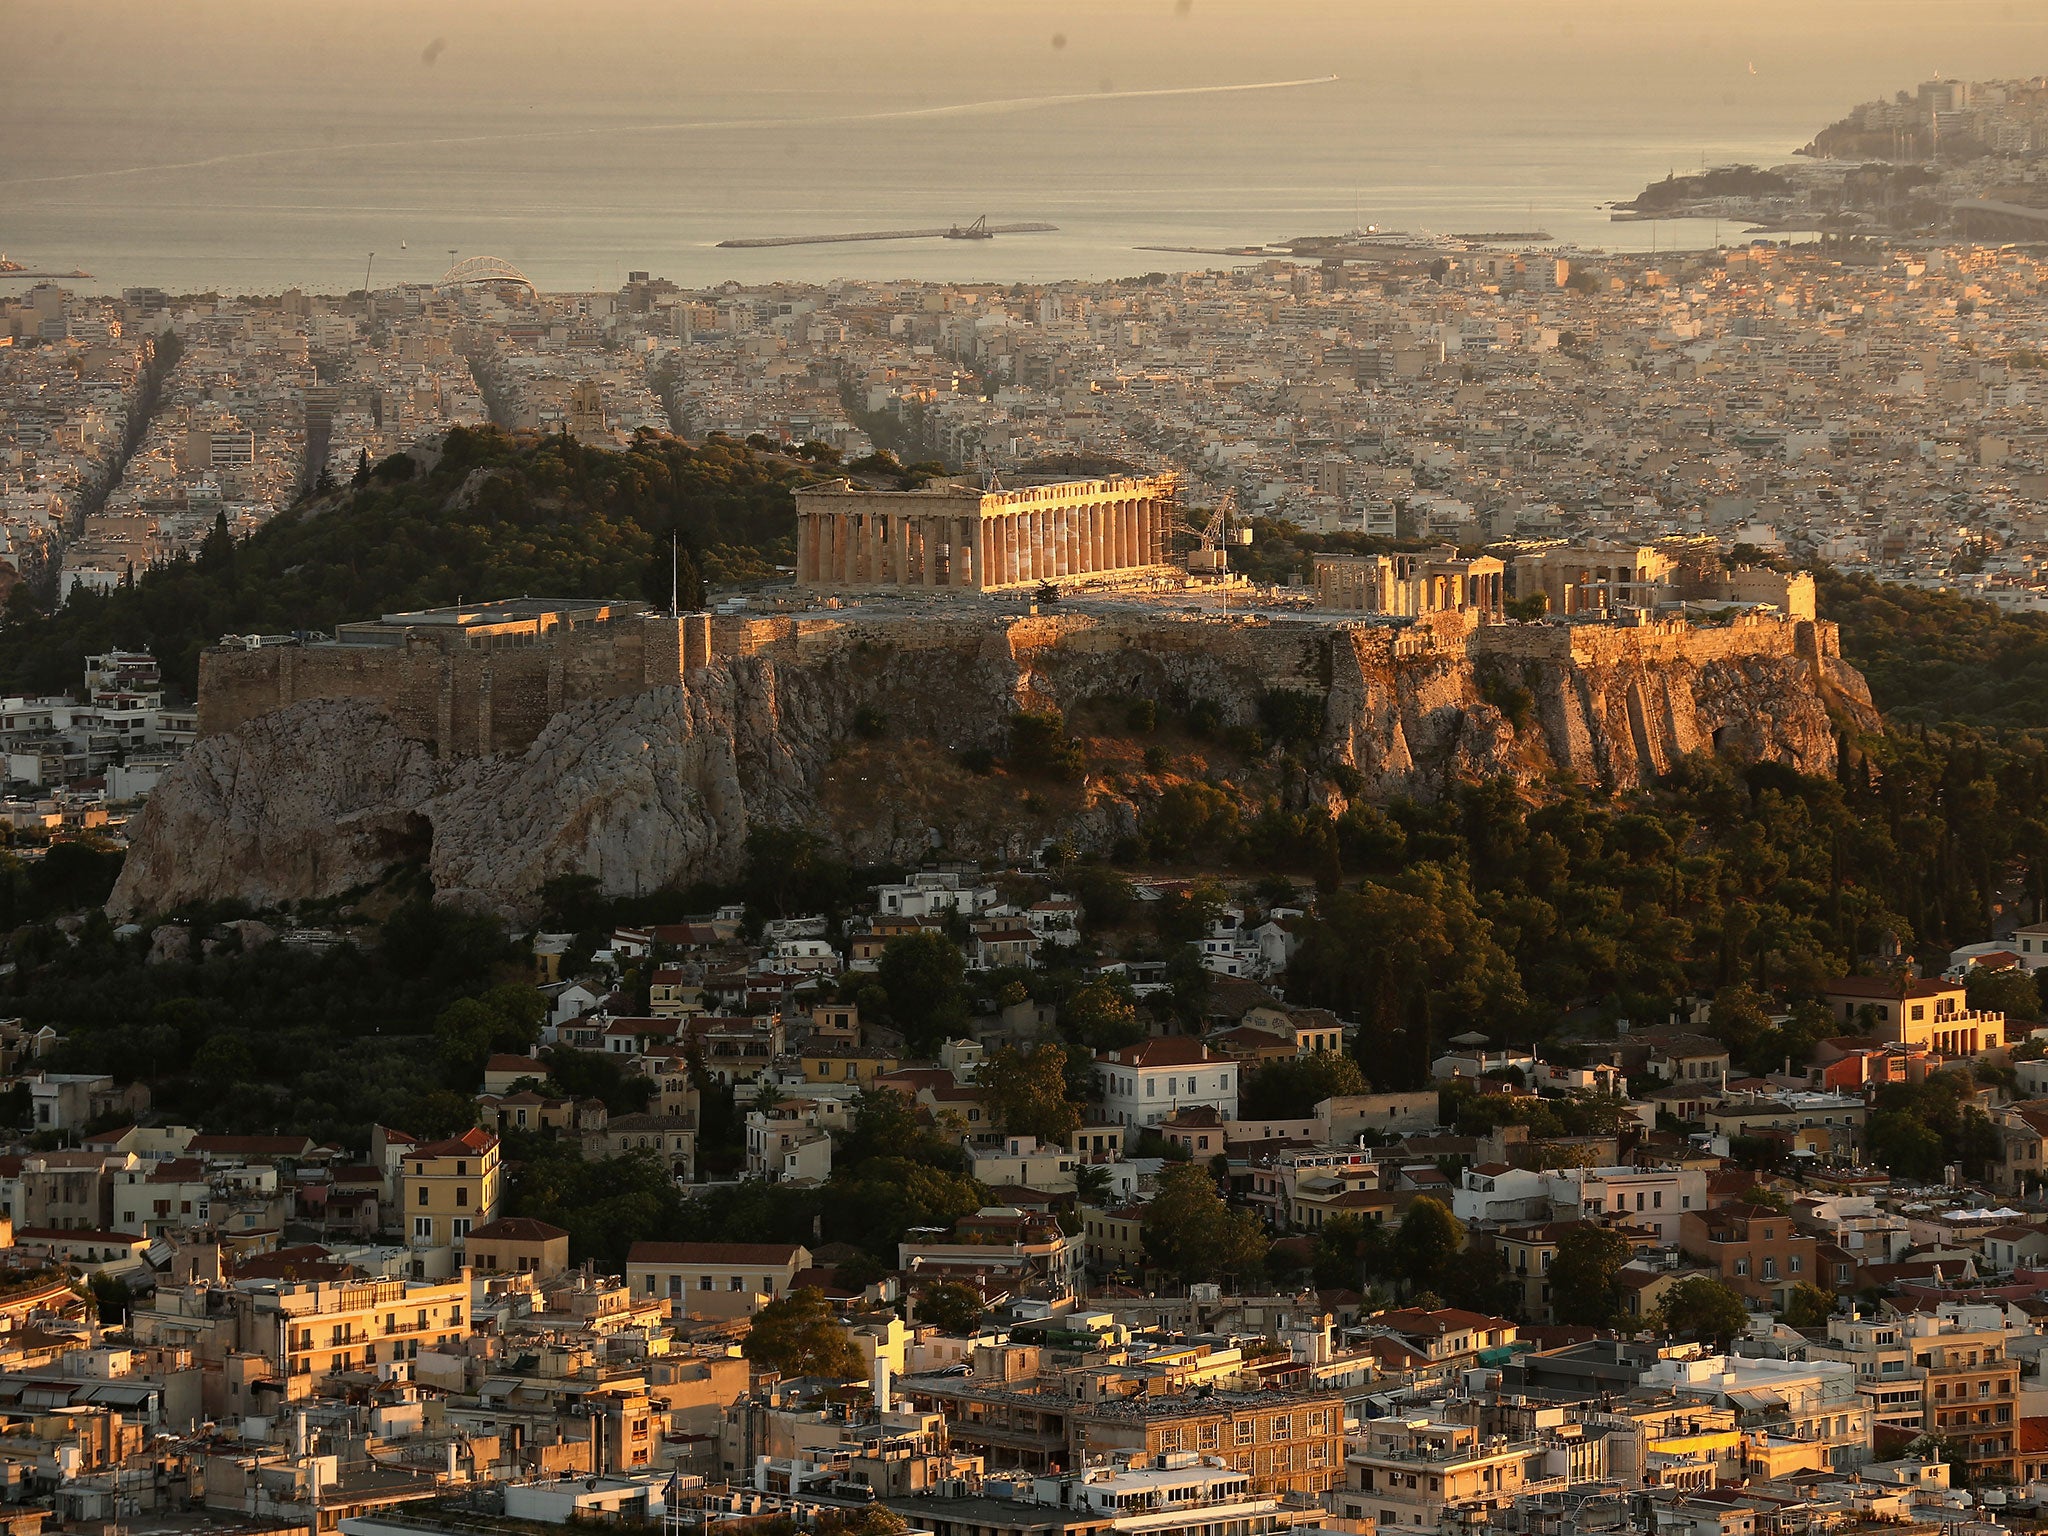 The Acropolis is still drawing in German tourists to Athens